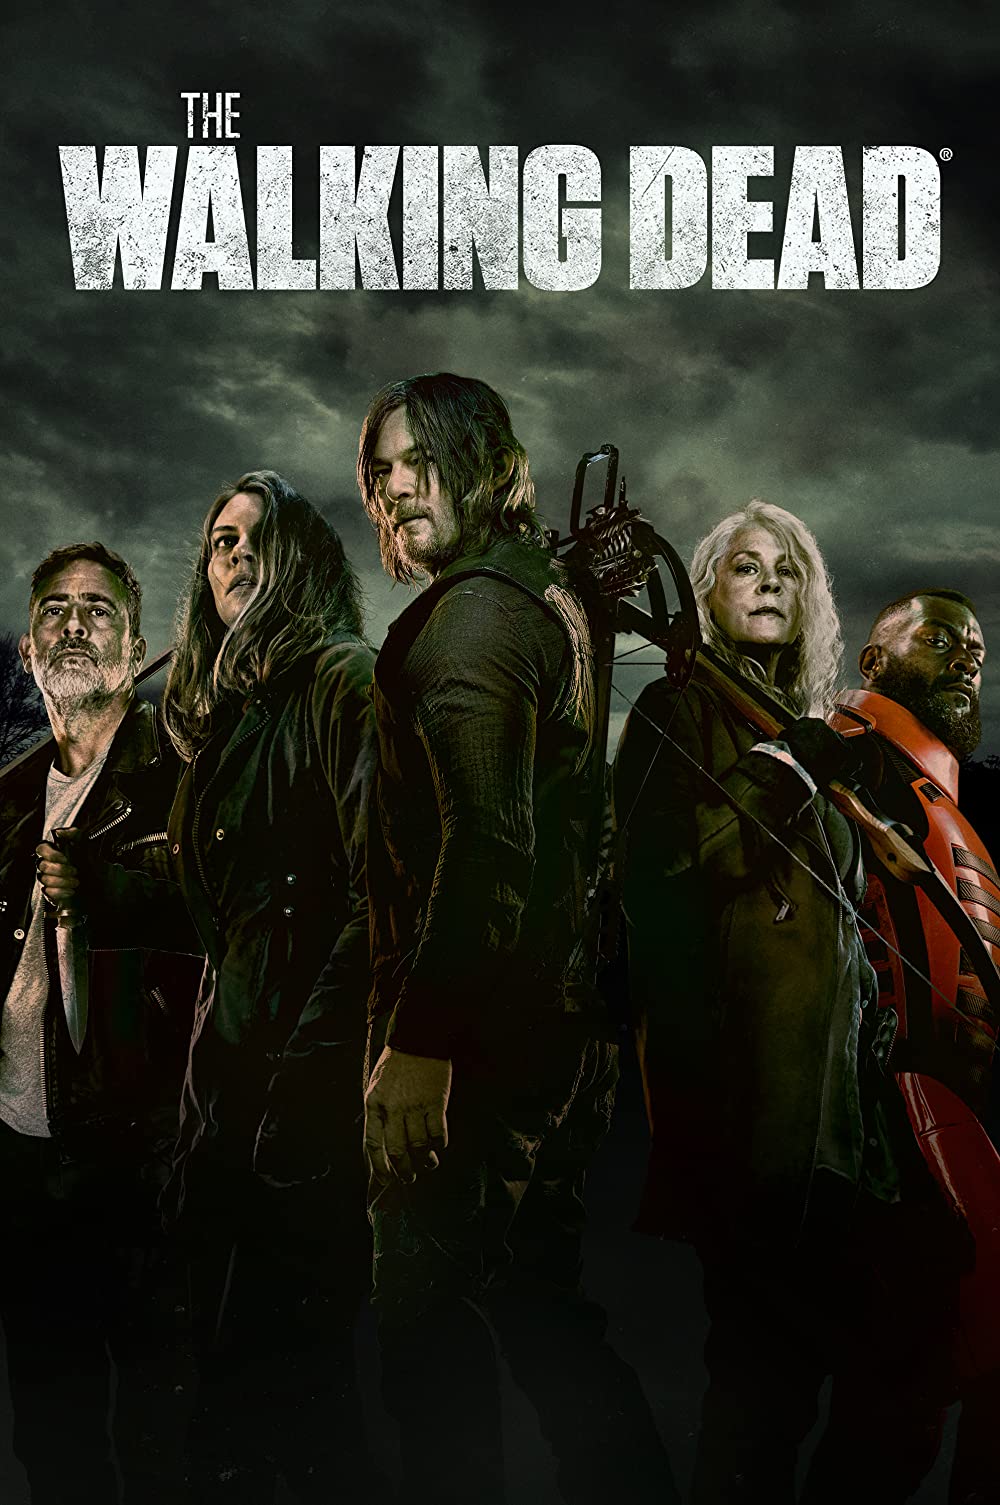 The Walking Dead S11E13 1080p WEB H264-PECULATE + NL subs